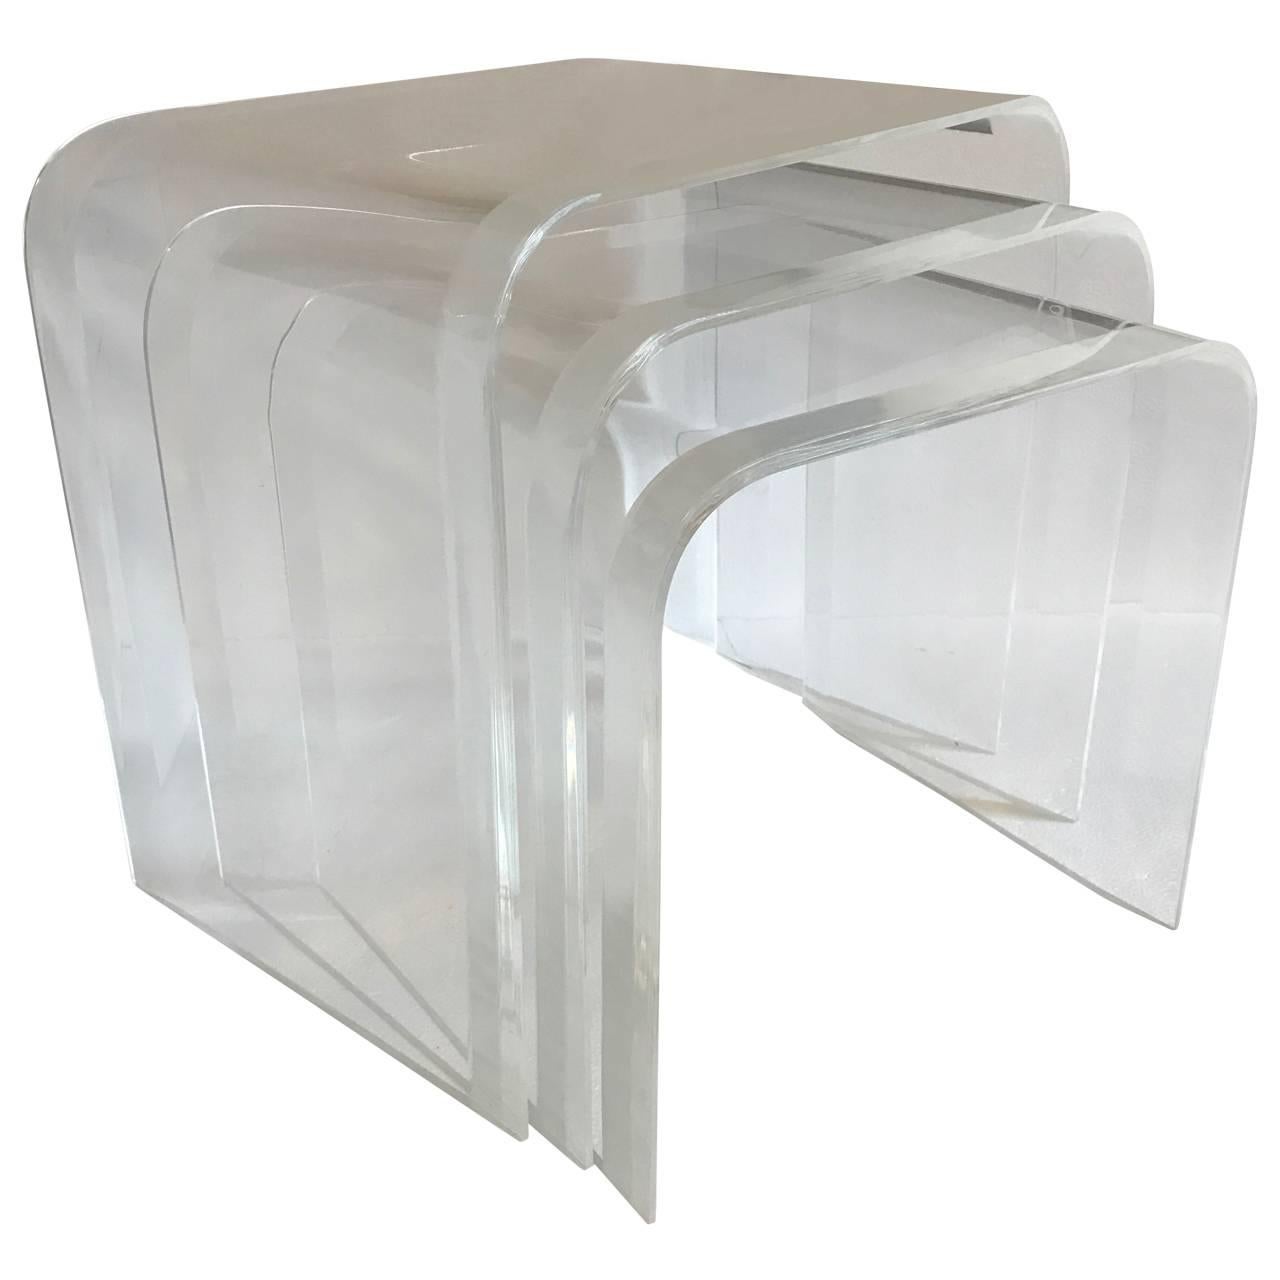 Set of thick Lucite waterfall nesting side tables. Edge on tables has a rare 1.5 inch wide bevelled edge.

Complementary front door delivery to New York City